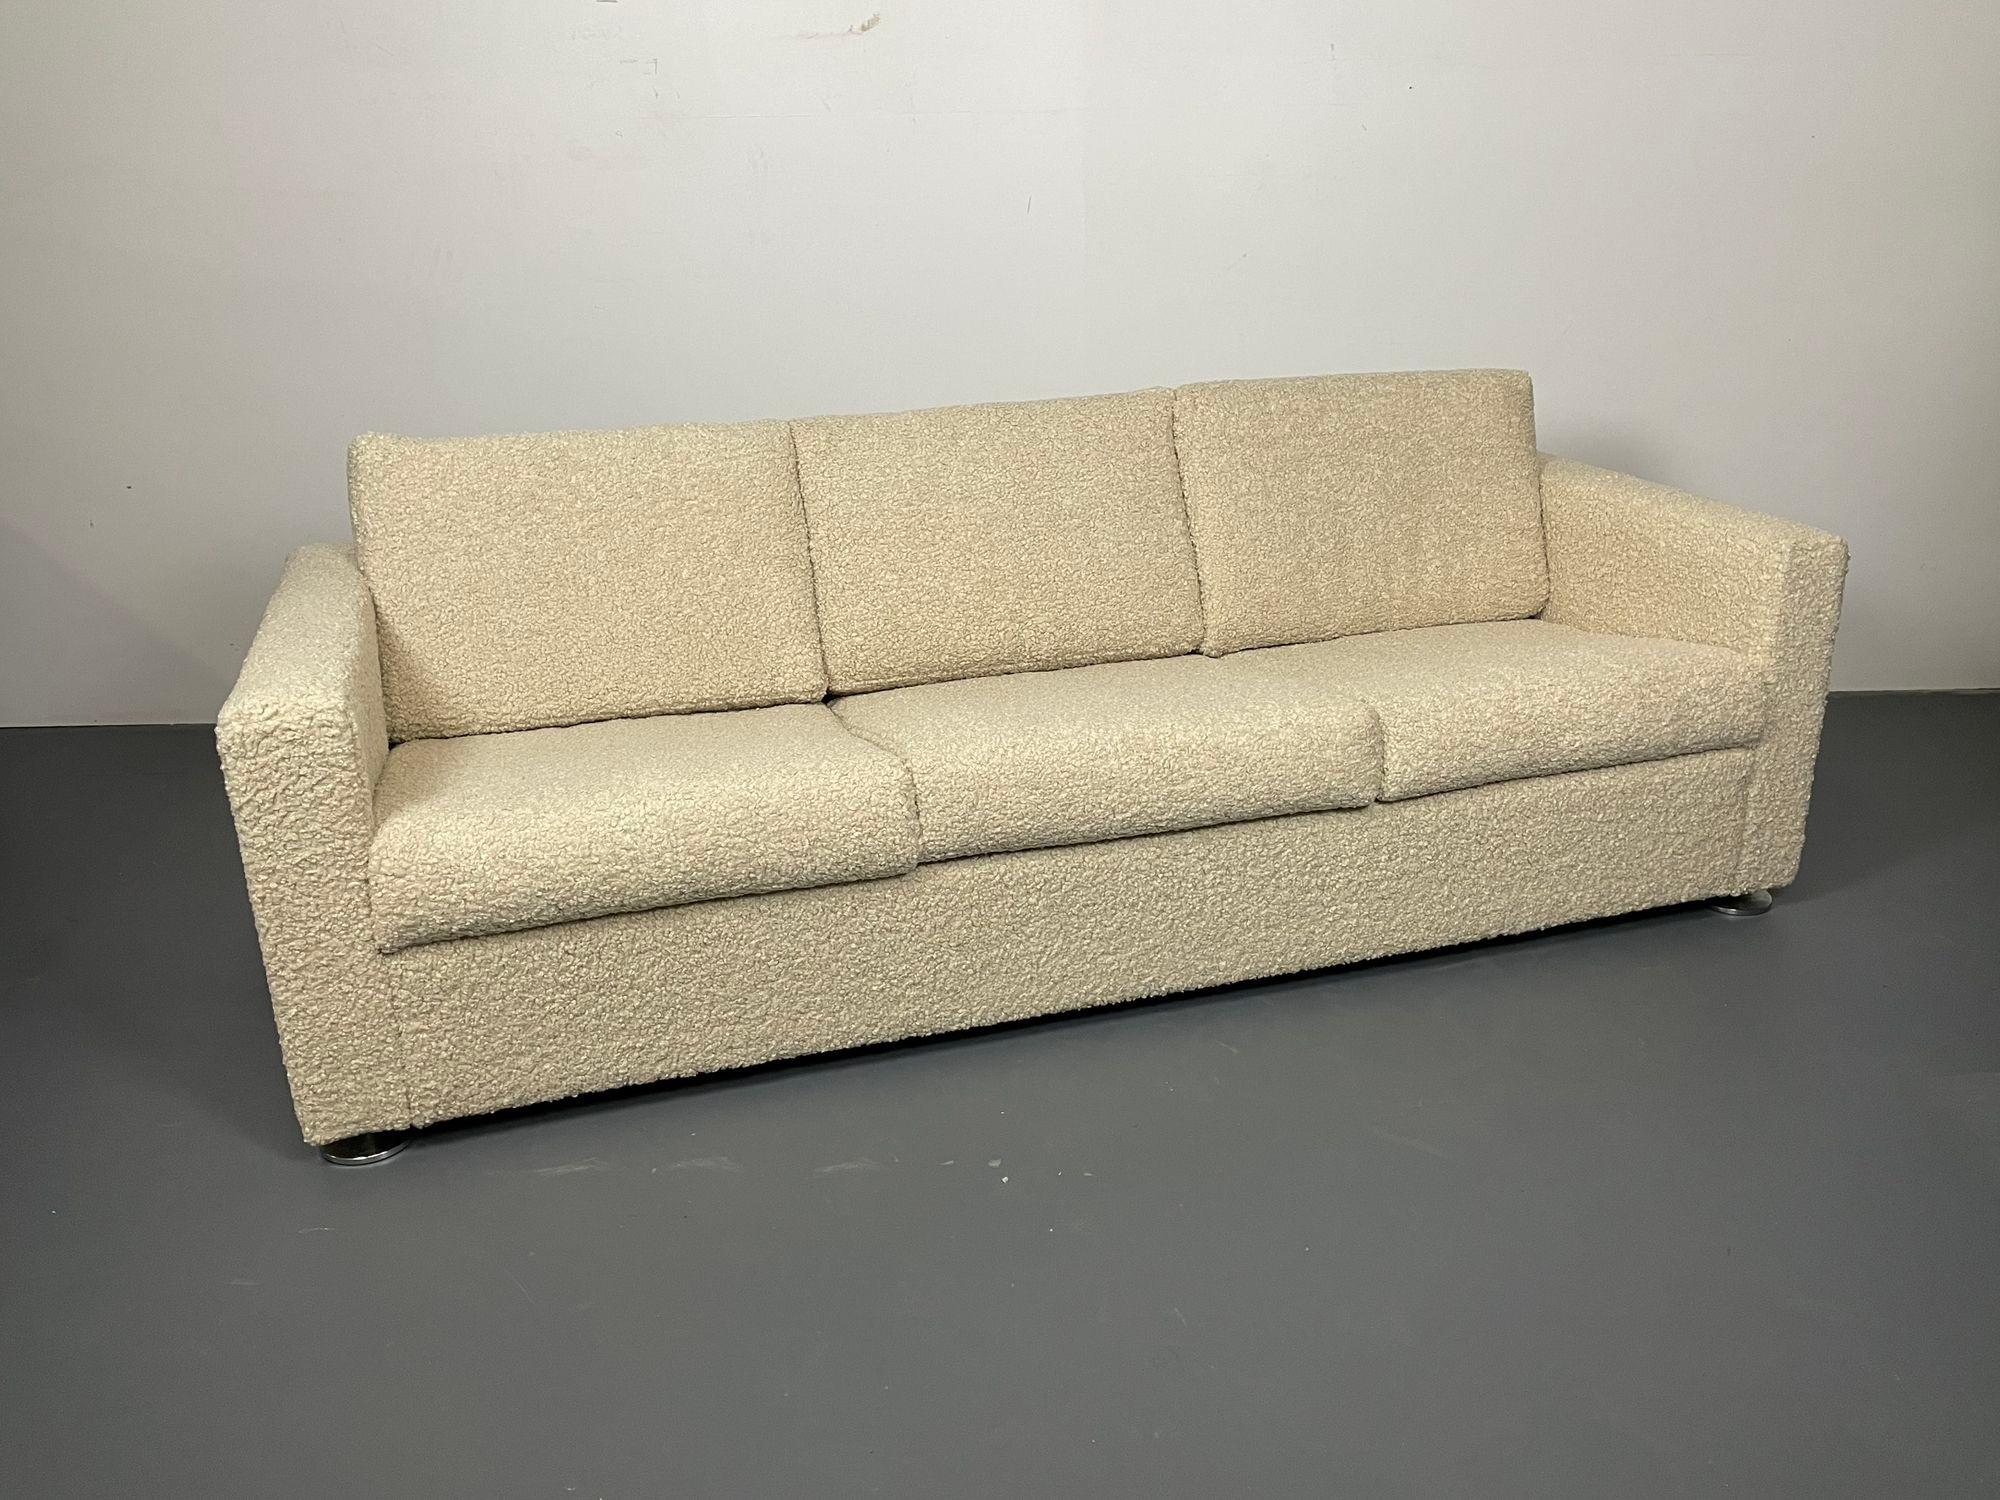 Sofa by Stendig, Switzerland, New Sheepskin Boucle, Mid Century Modern, Labeled.

A rare Mid Century Modern sofa by Stendig, made in Switzerland, in a new sheepskin style boucle, thick and rich with fully redone cushions. The box form mid century